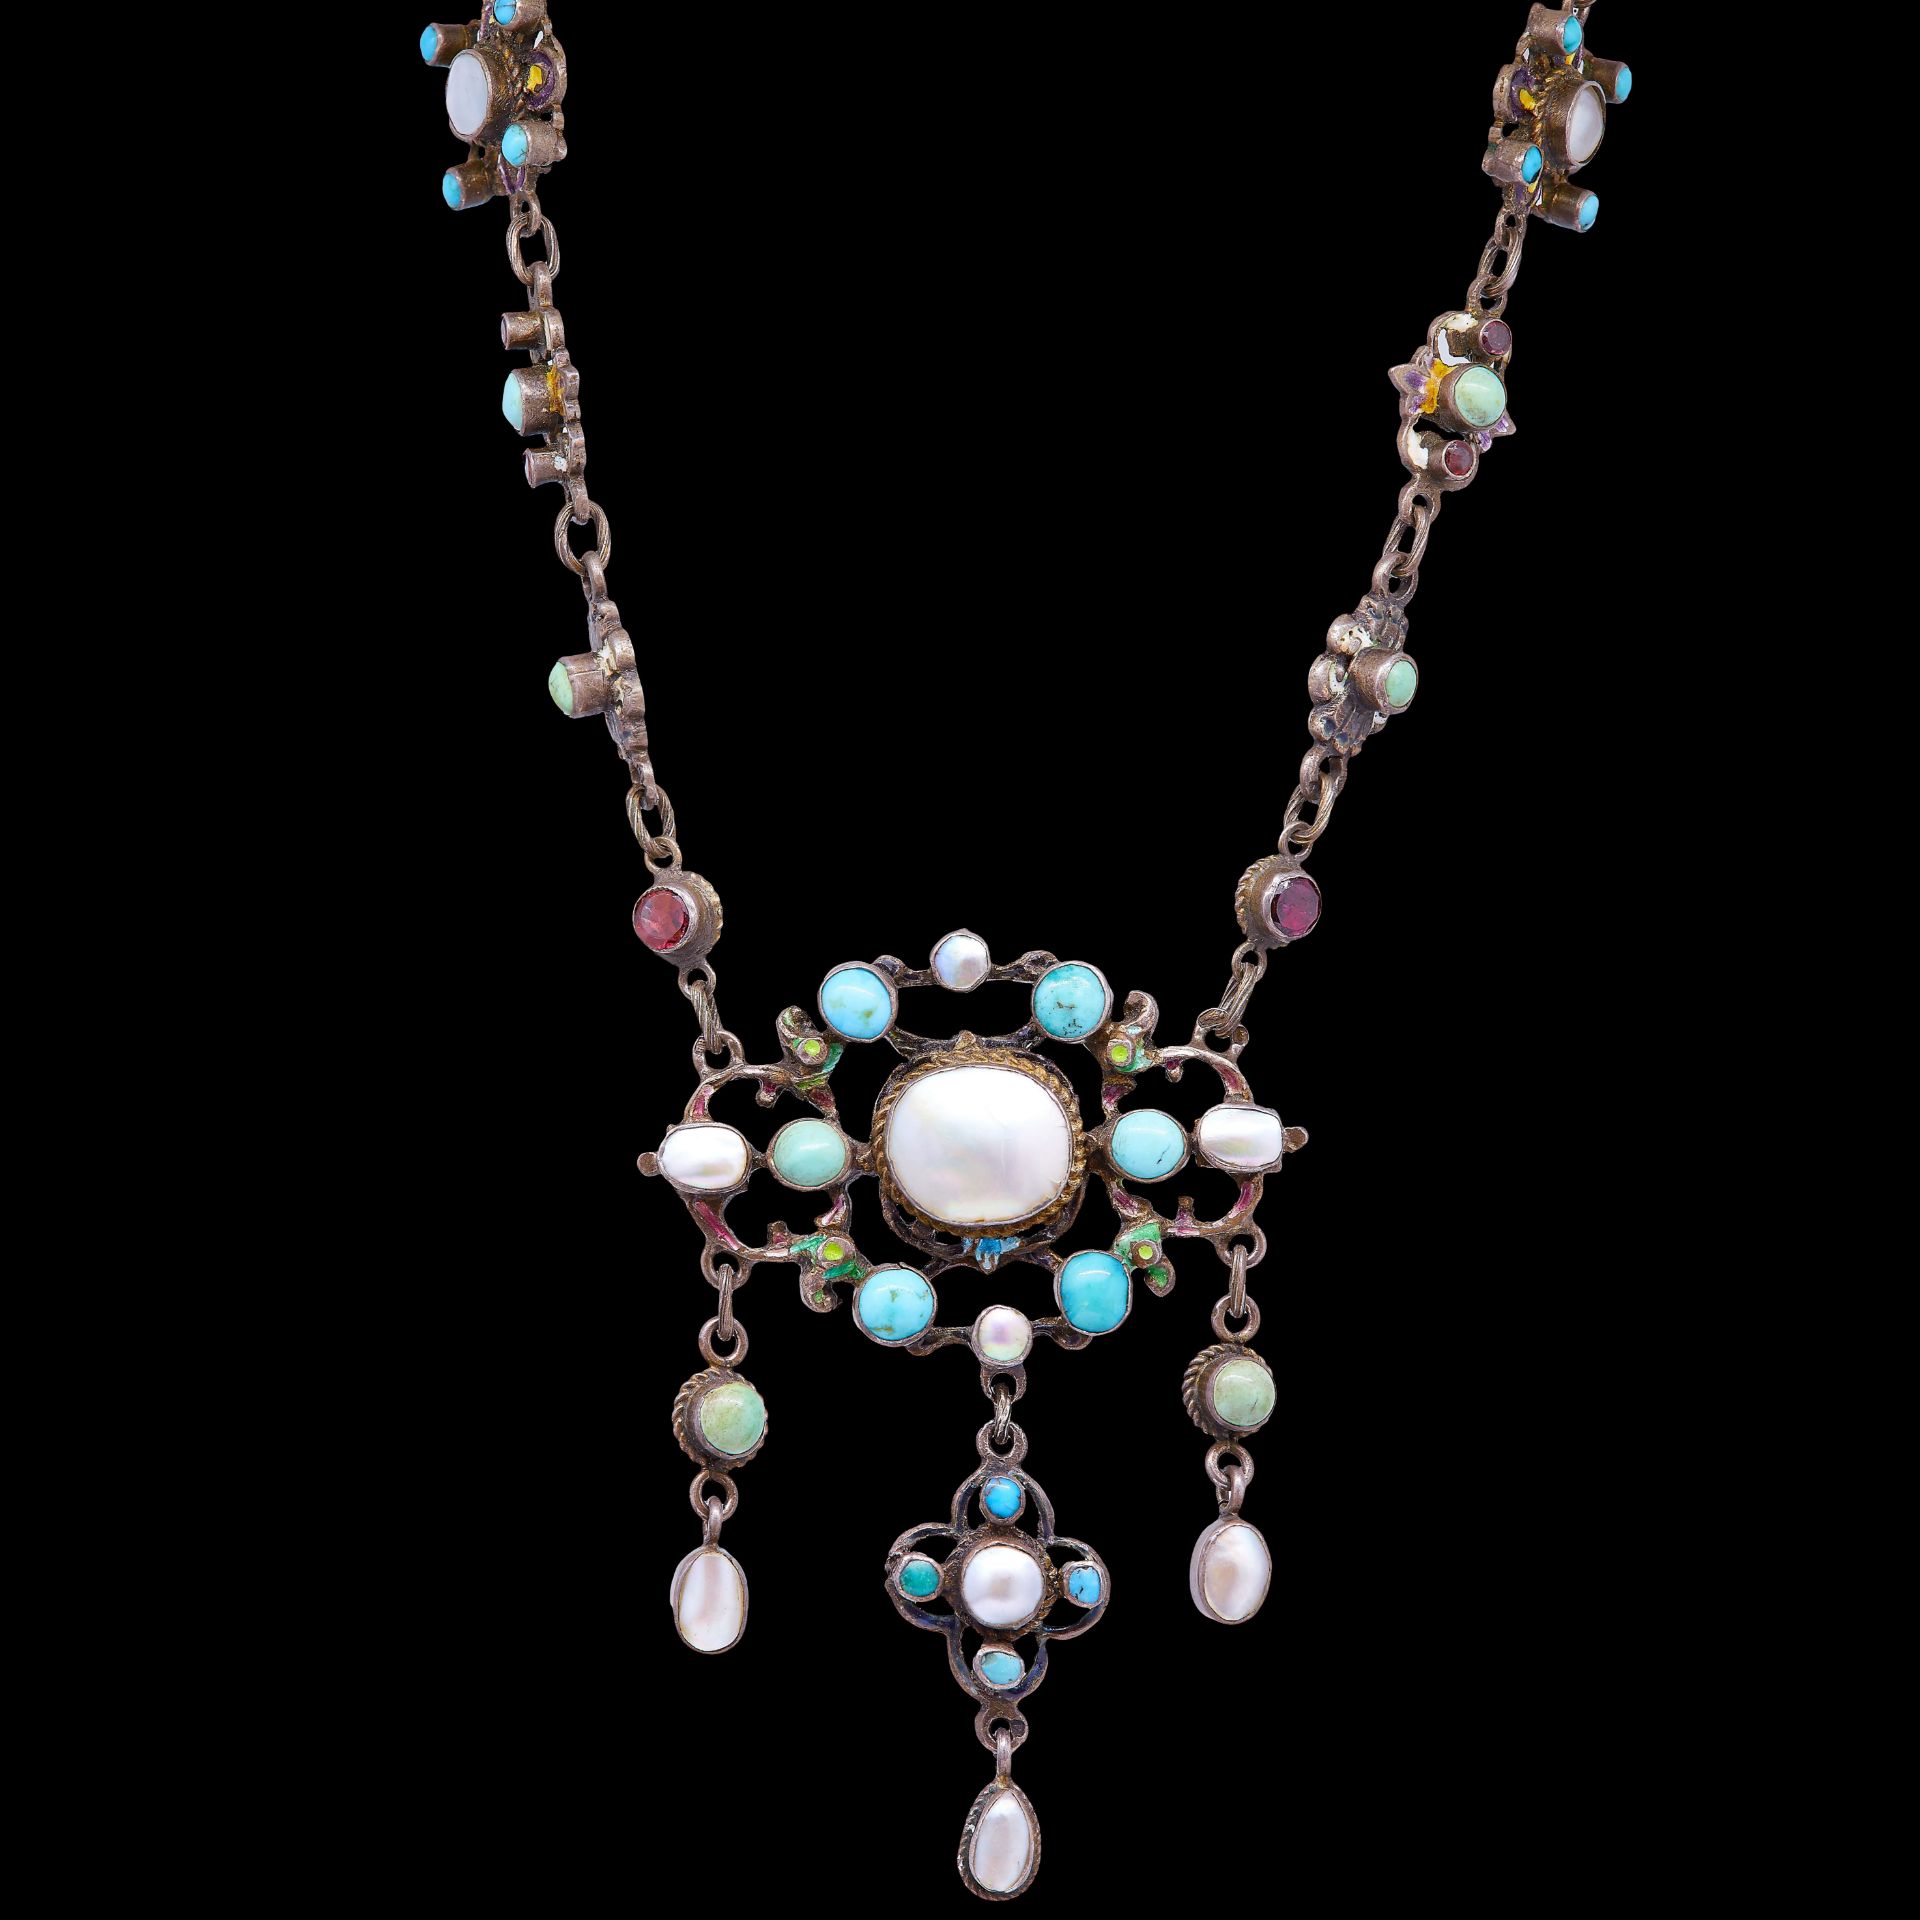 ANTIQUE MOTHER OF PEARL, TURQUOISE, PASTE AND ENAMEL NECKLACE